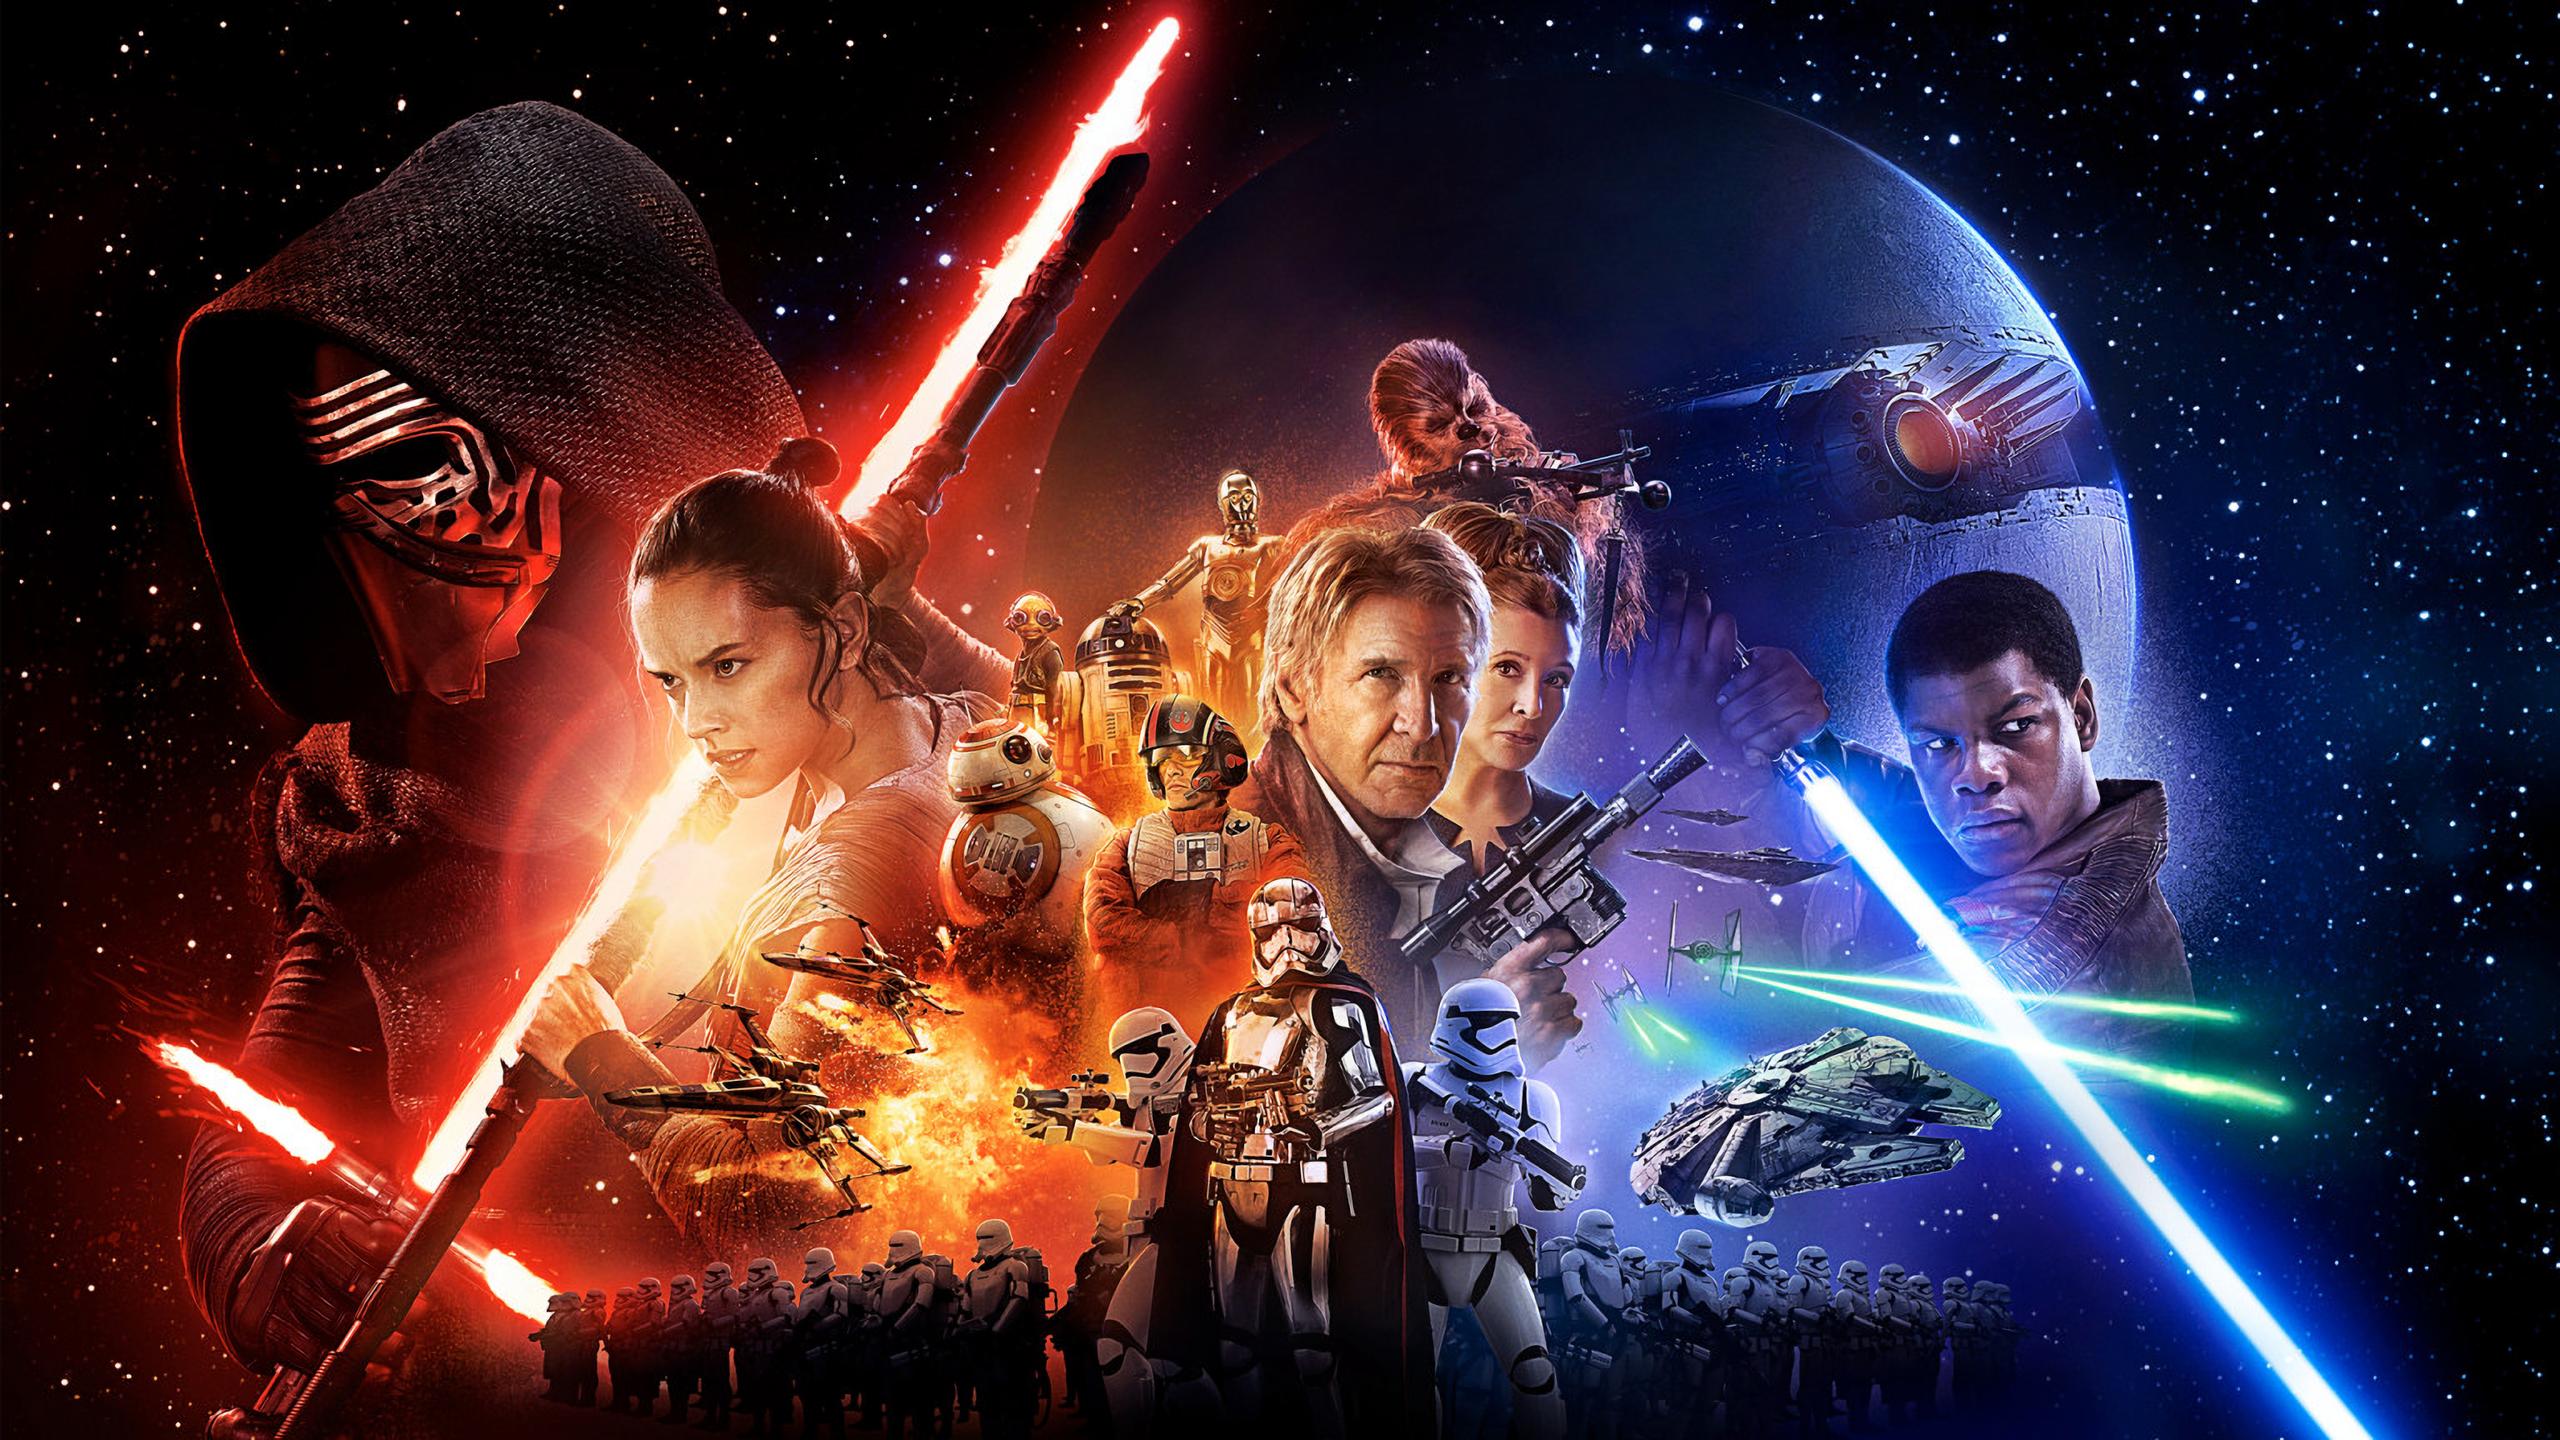 191 Star Wars Episode VII: The Force Awakens HD Wallpapers